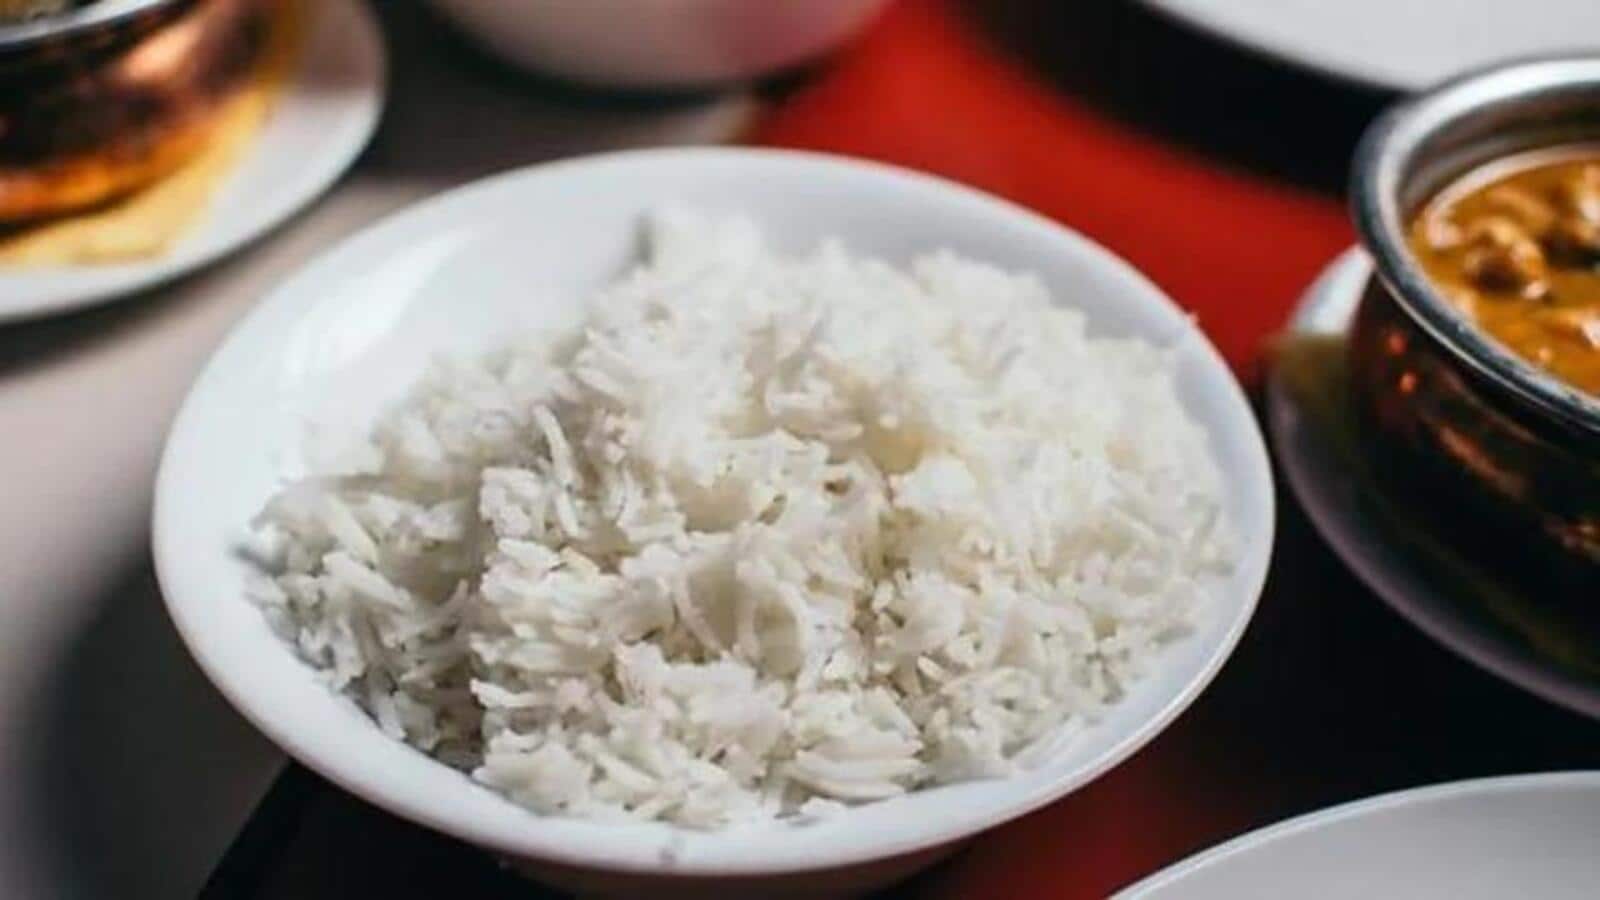 Man kills wife for not cooking rice for him | Mumbai news